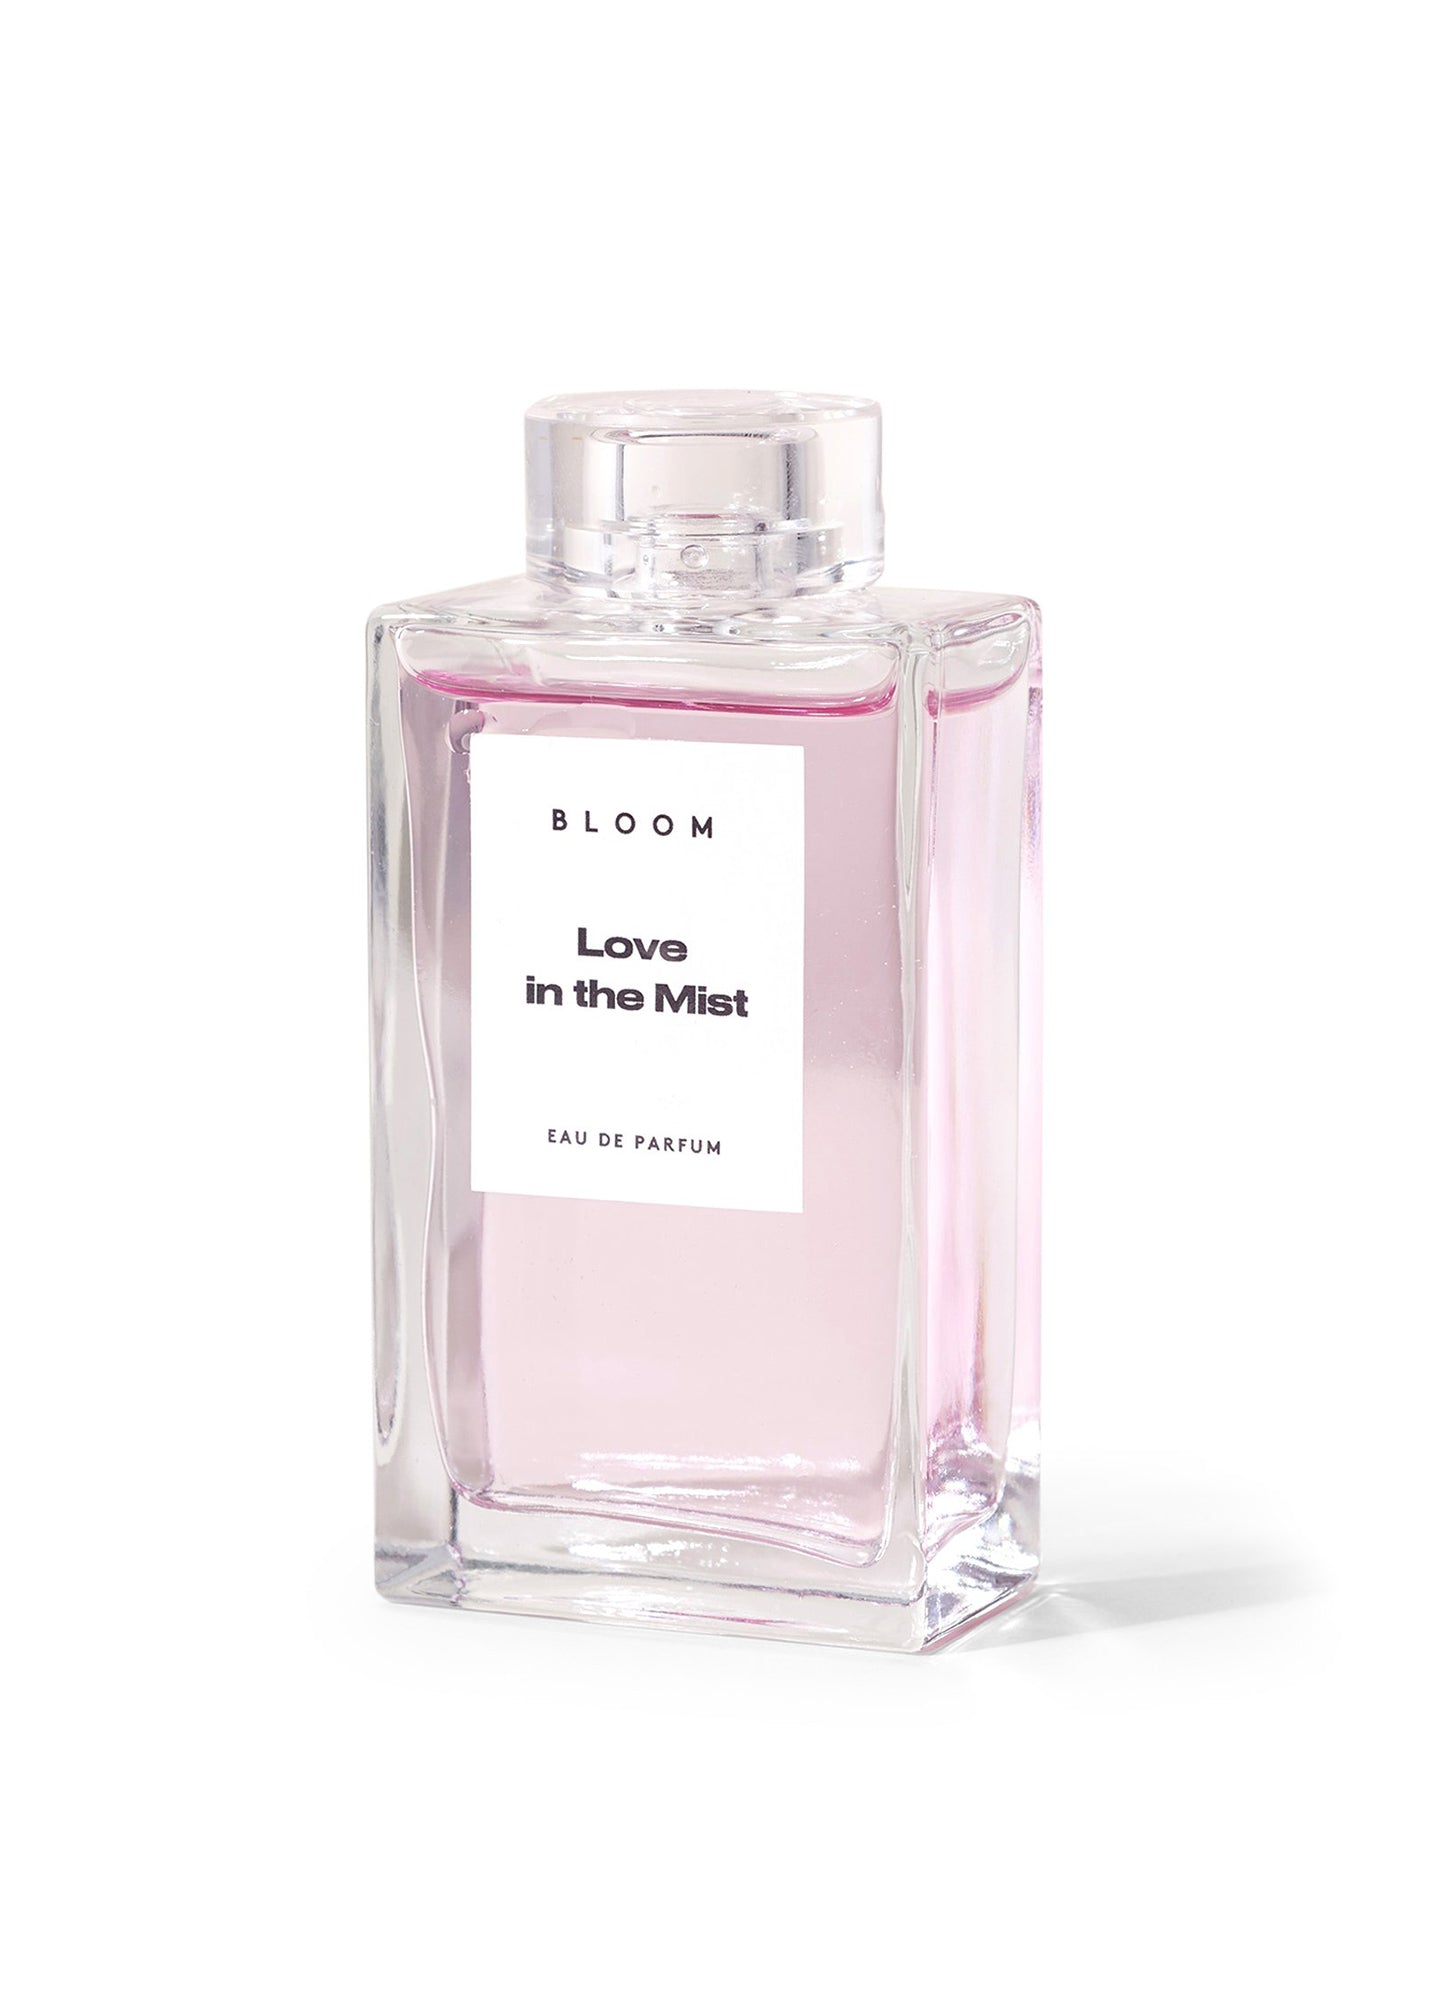 Love in the Mist Perfume